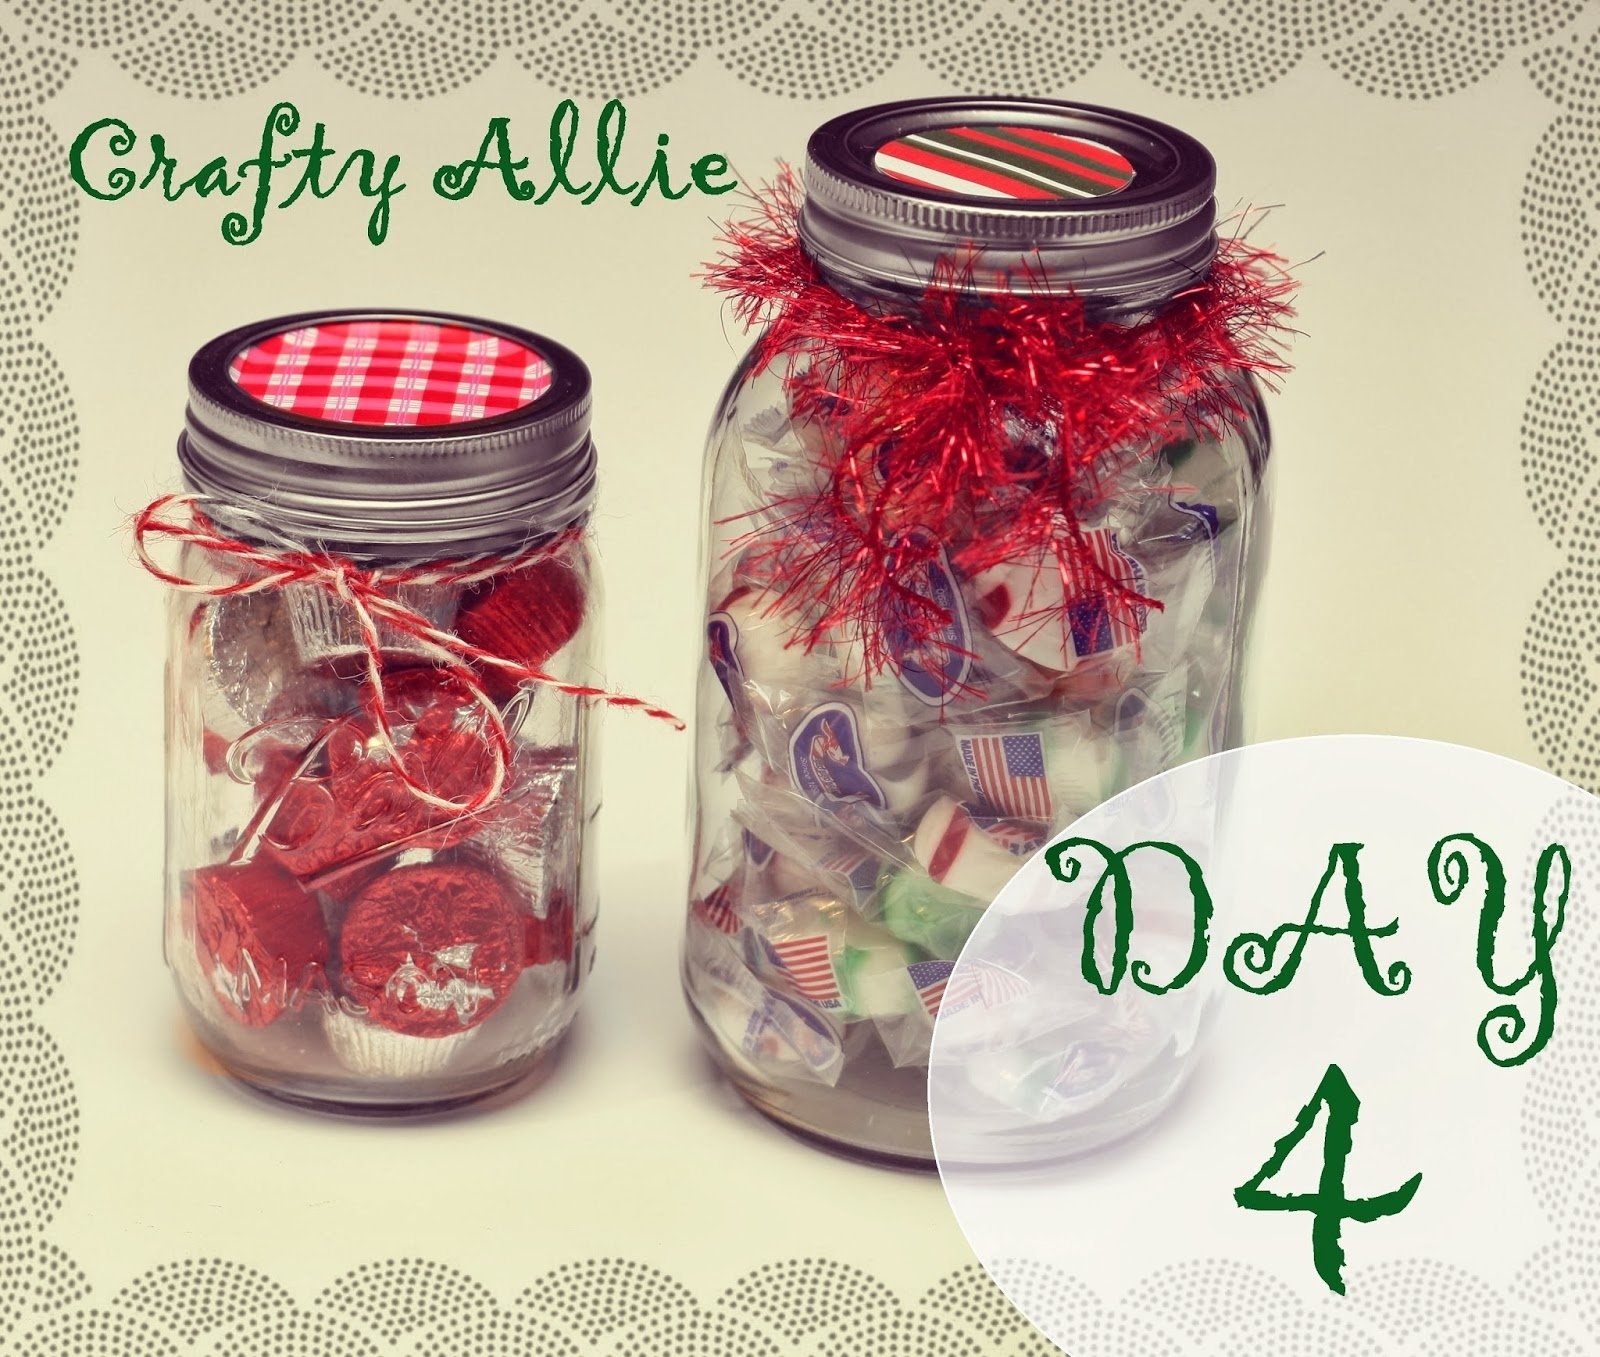 10 Perfect Gifts In A Jar Ideas For Christmas crafty allie day 4 of the 12 days of christmas christmas mason jar 2022